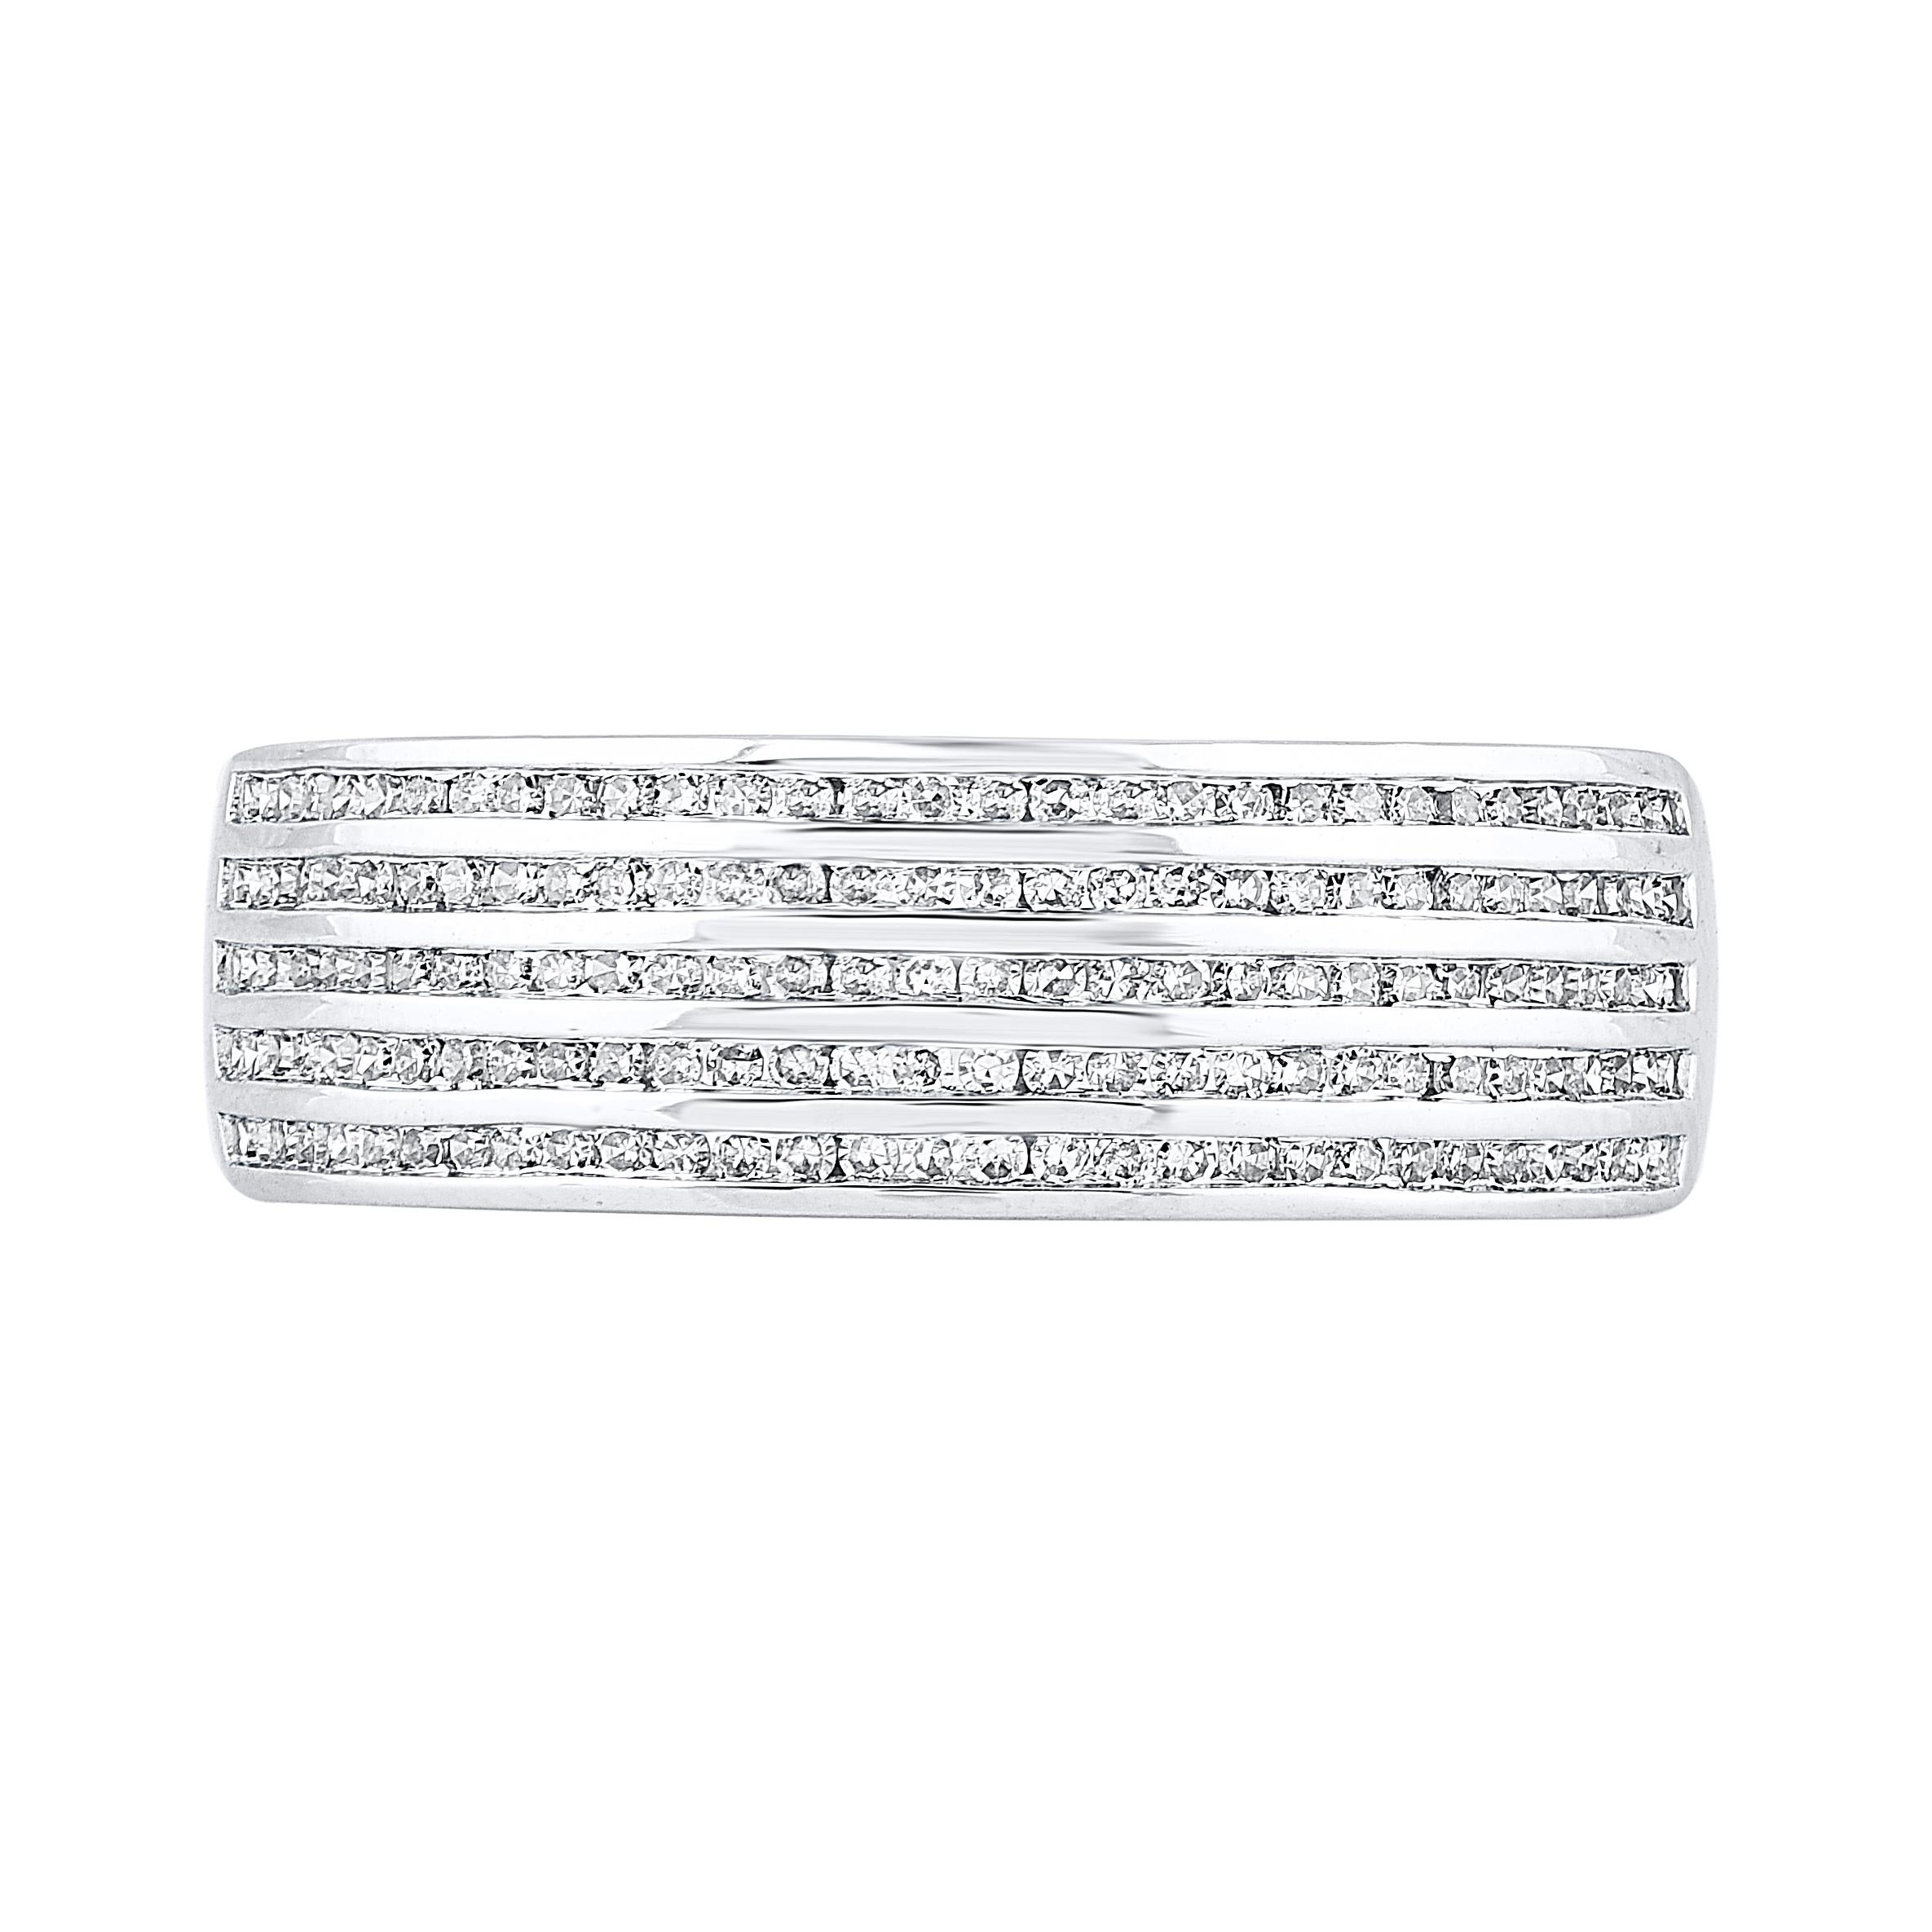 Simple & classic, this diamond multi-row band is sure to be admired for the inherent classic beauty and elegance within its design. This ring is beautifully crafted in 14 Karat white gold and embedded with 155 single cut round white diamond set in